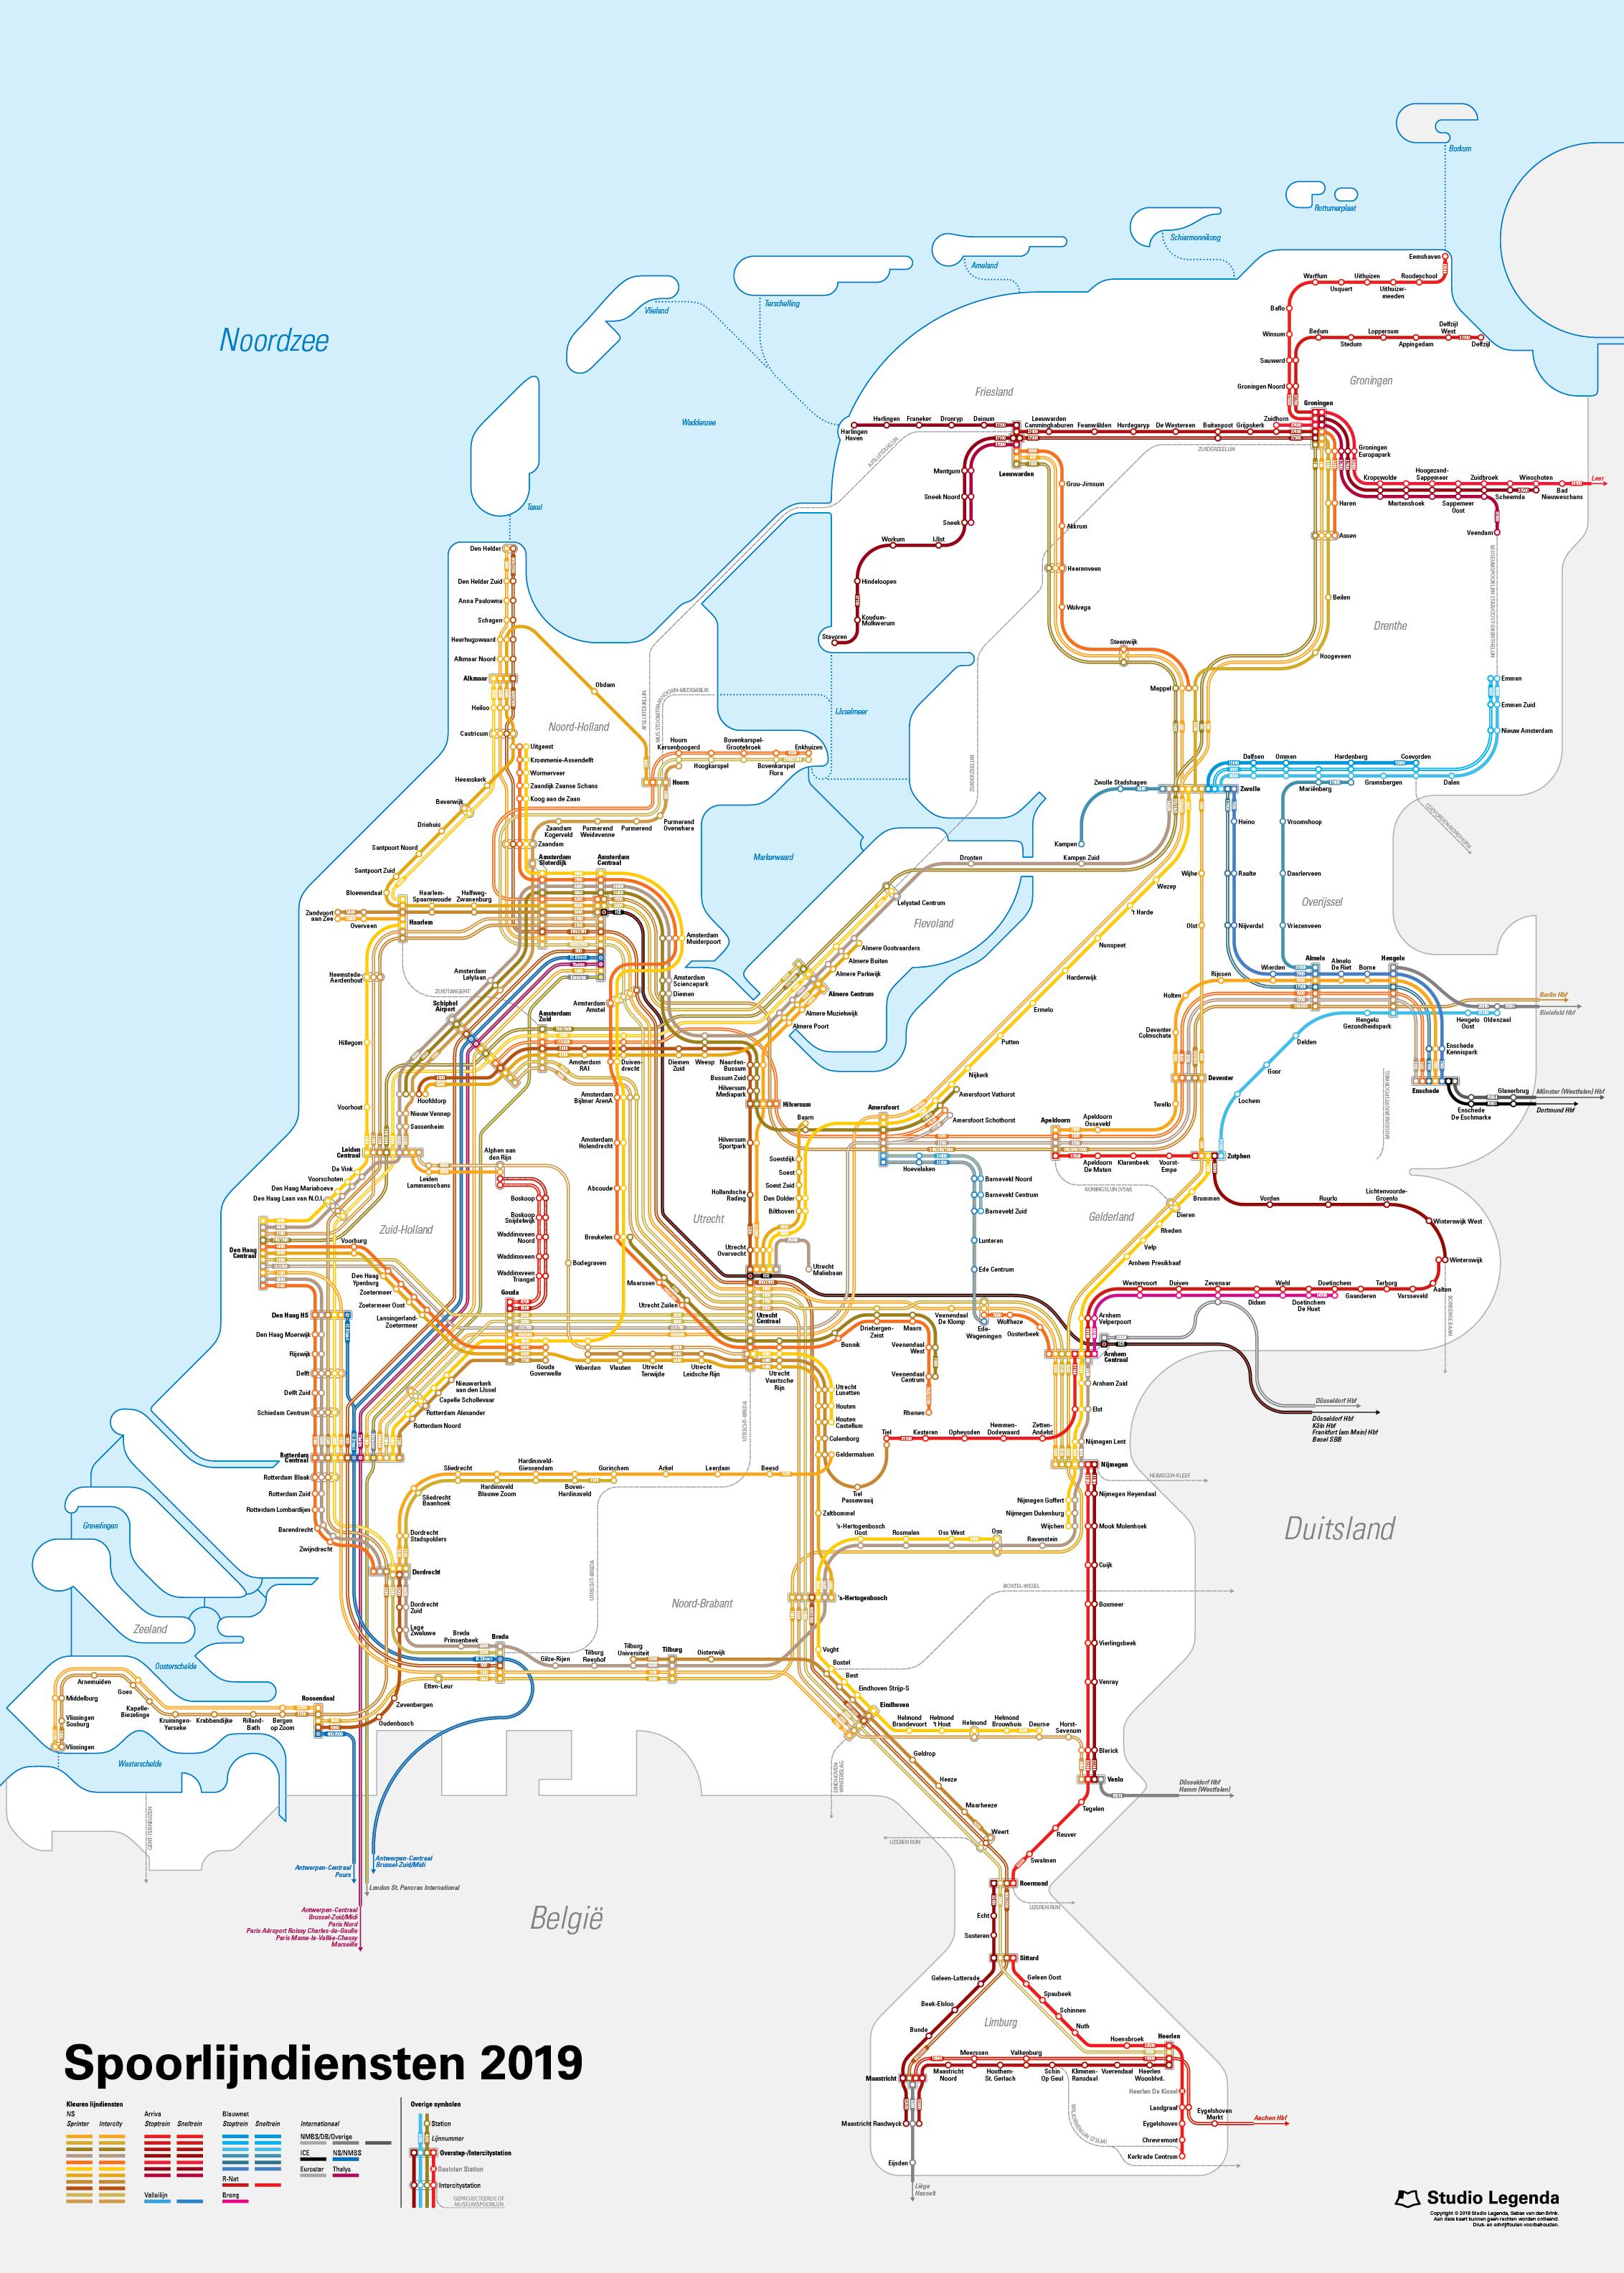 Map of Netherlands trains rail lines and high speed train of Netherlands